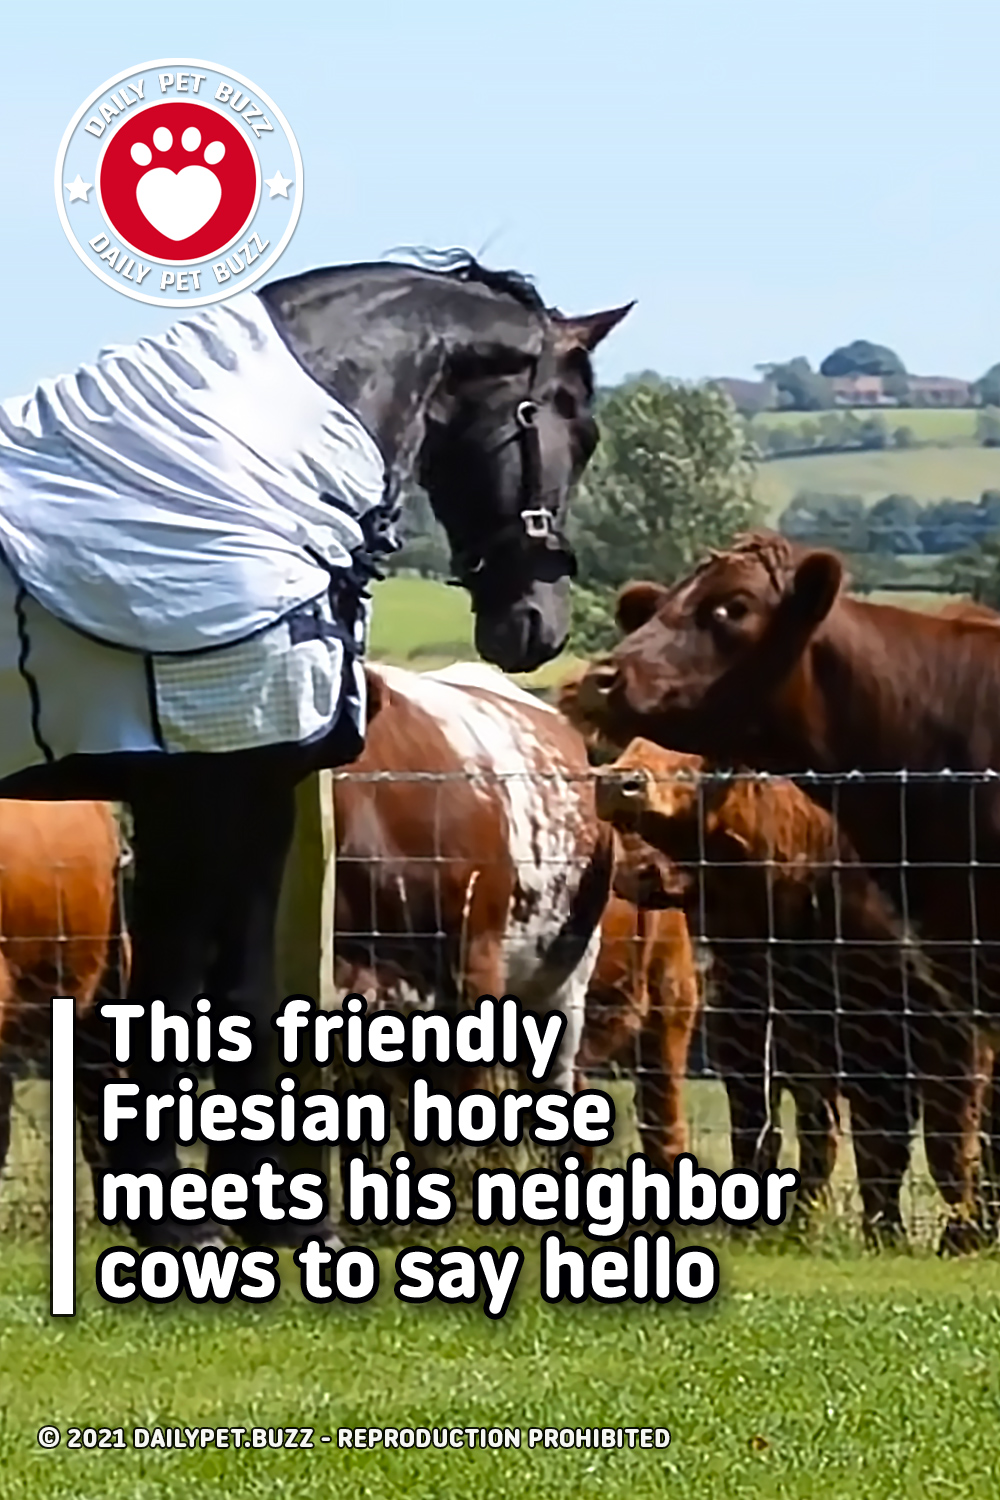 This friendly Friesian horse meets his neighbor cows to say hello